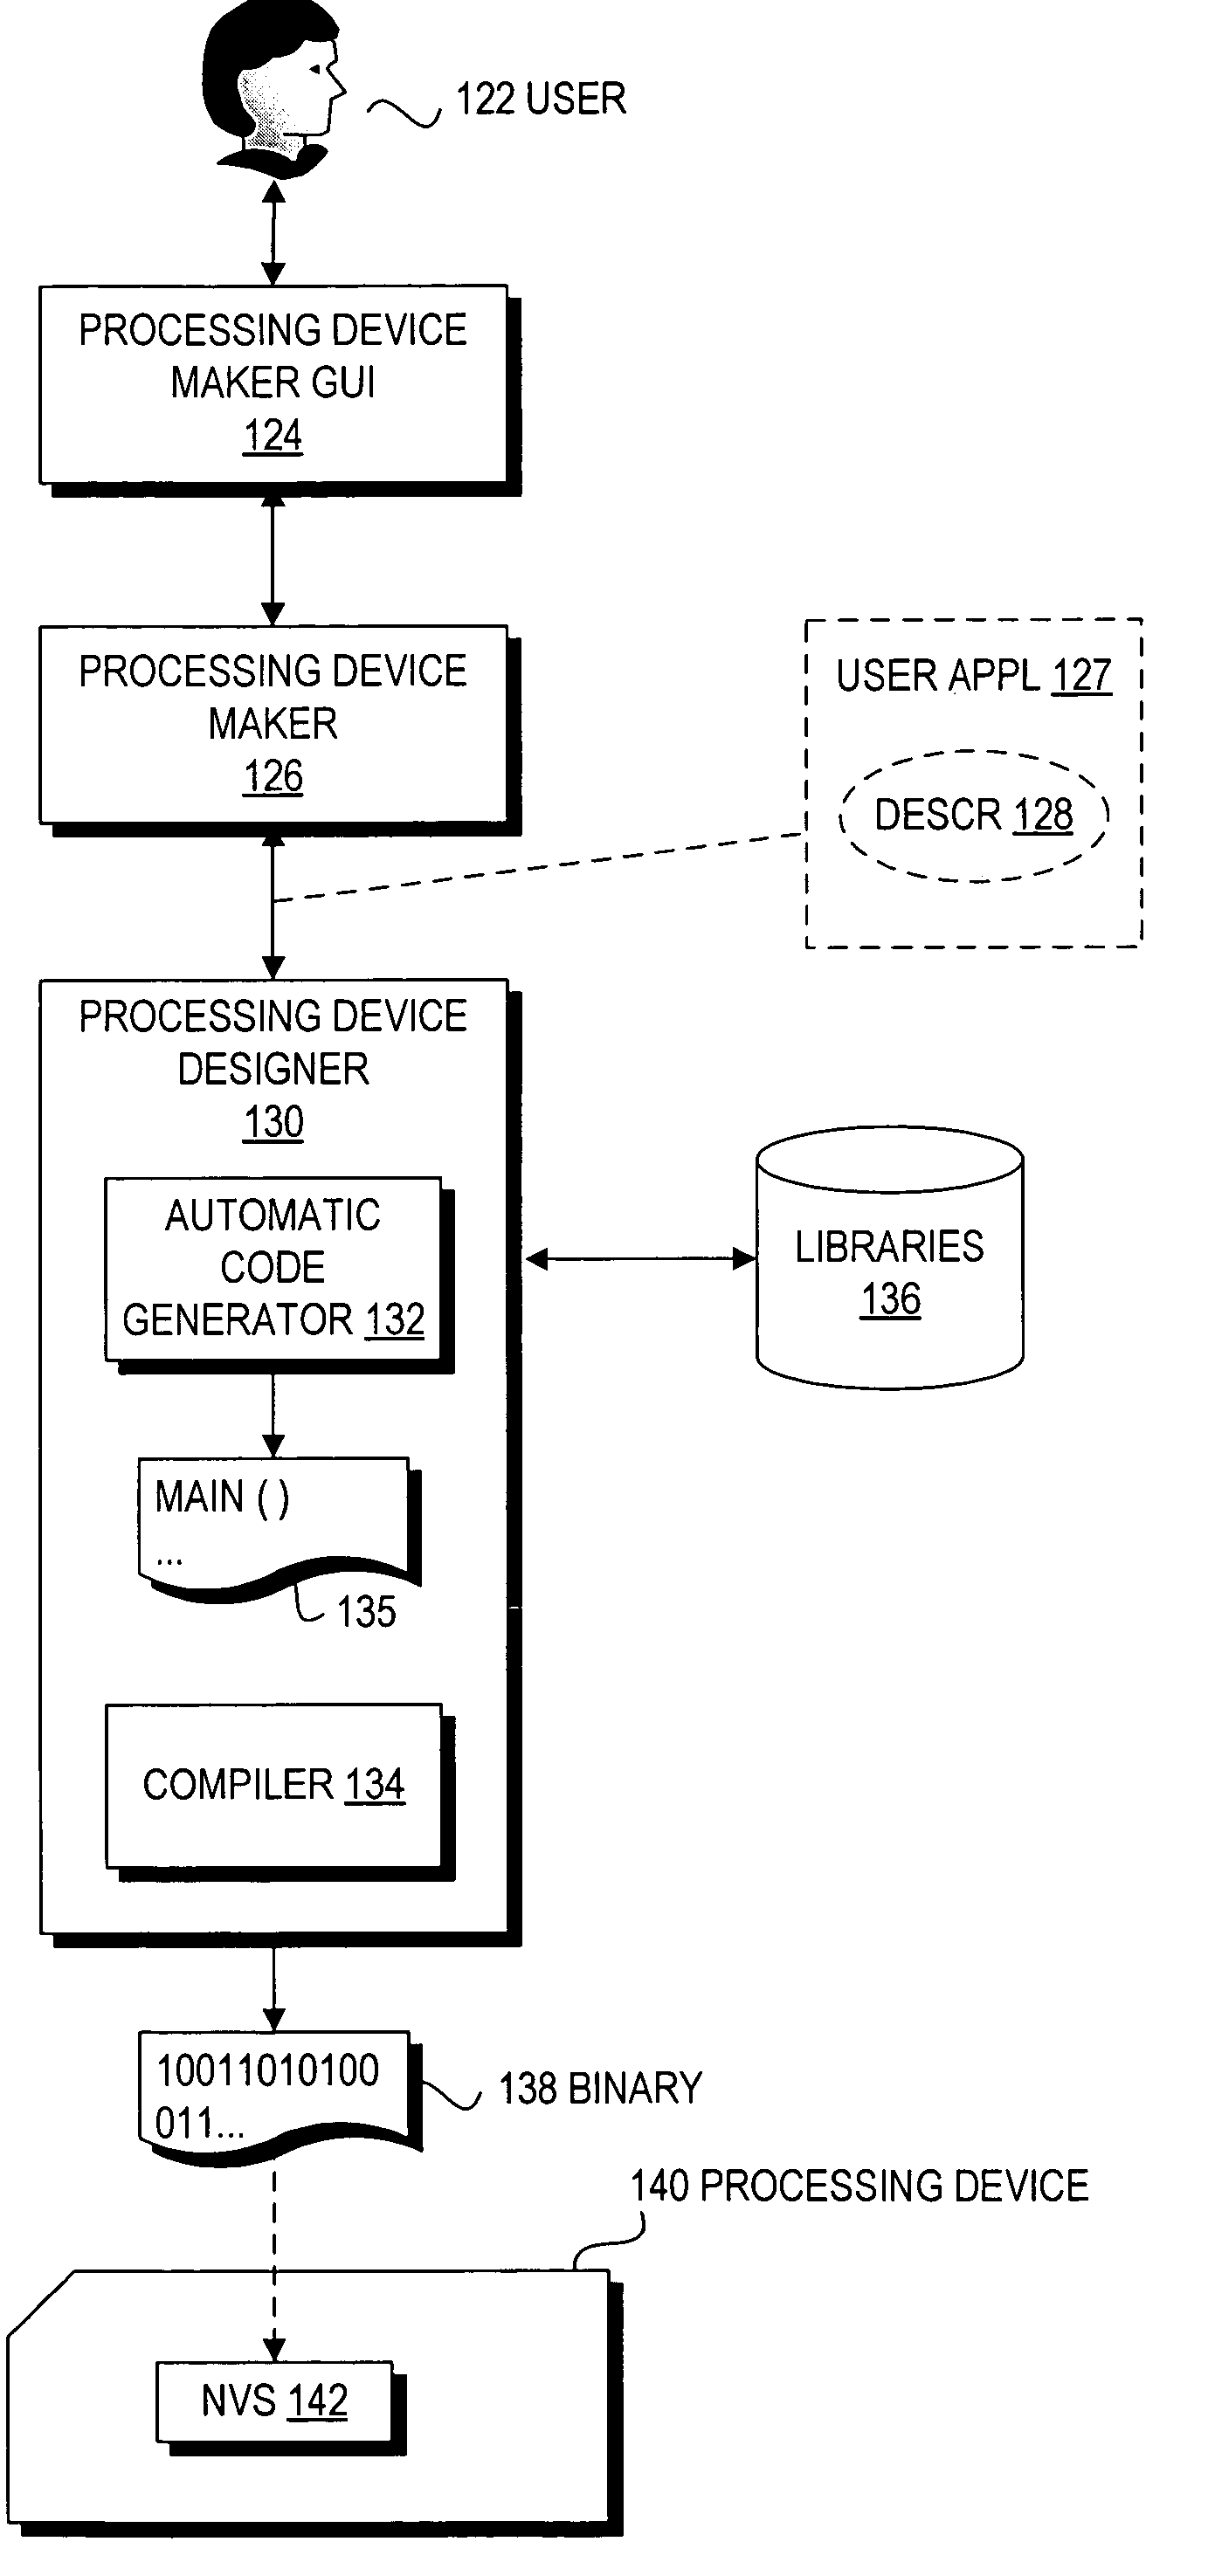 Providing hardware independence to automate code generation of processing device firmware